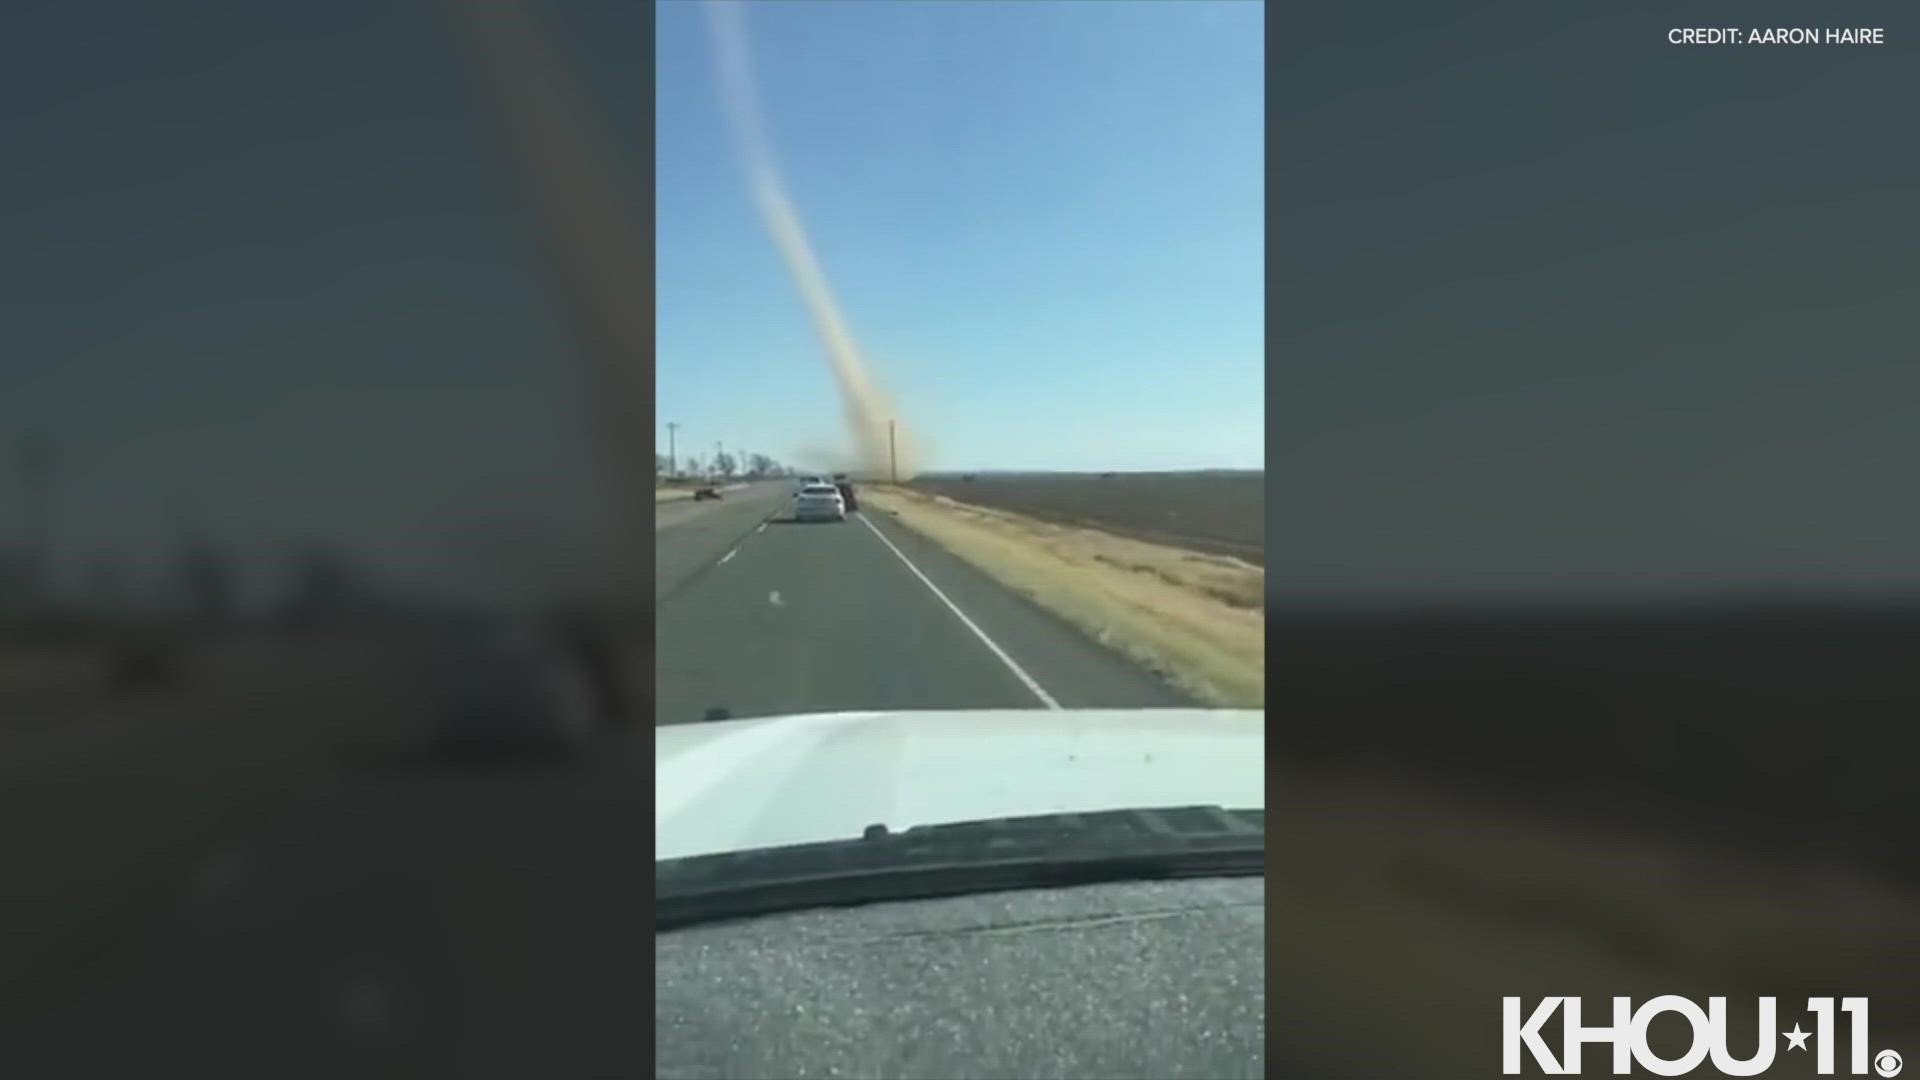 Check out this huge dust devil caught on camera near San Angelo, Texas!